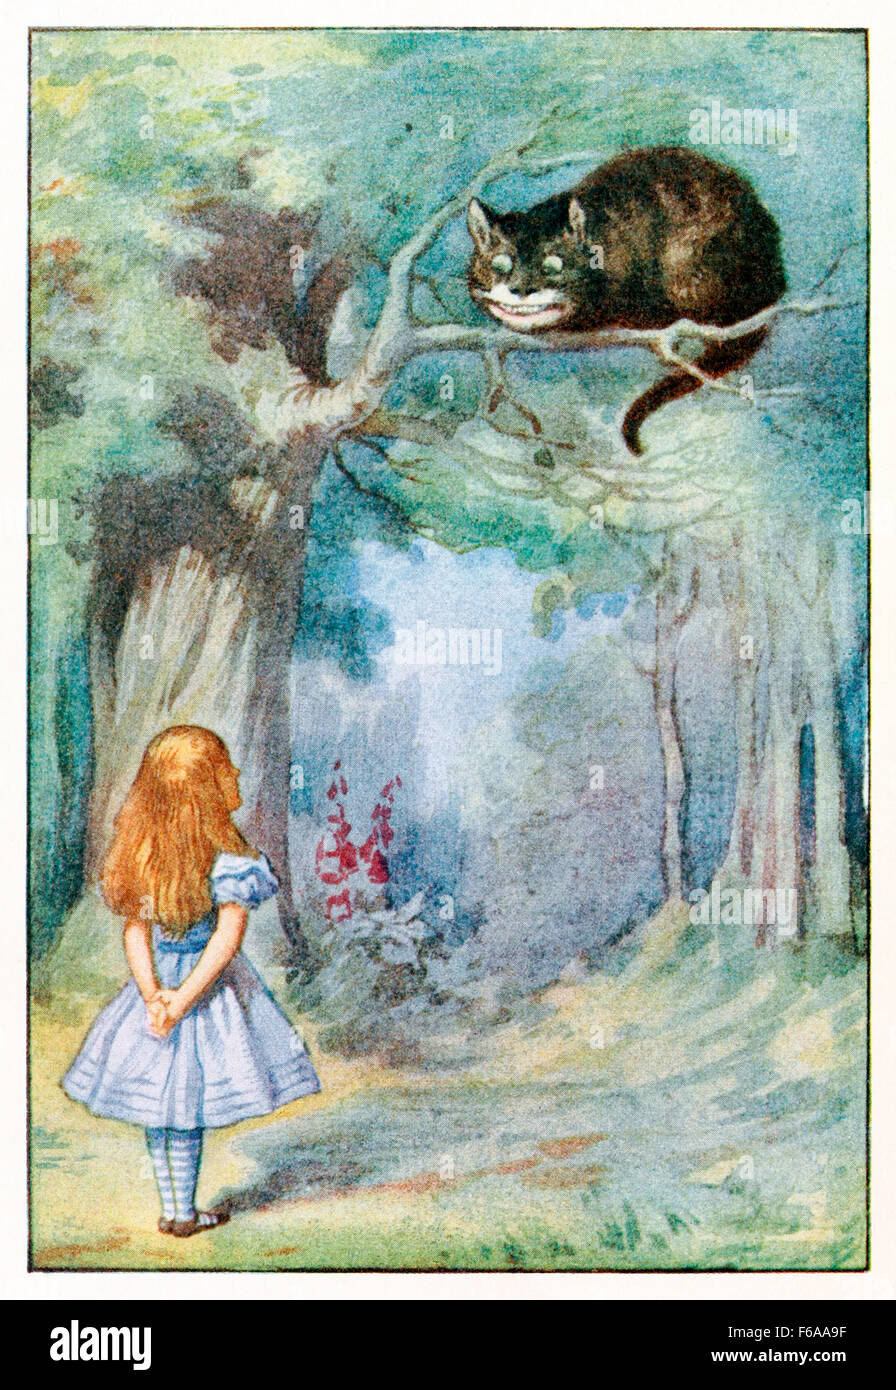 'I growl when I'm pleased, and wag my tail when I'm angry' said the Cheshire Cat from 'Alice's Adventures in Wonderland'  by Lewis Carroll (1832-1898), illustrated by Sir John Tenniel. See description for more information. Stock Photo